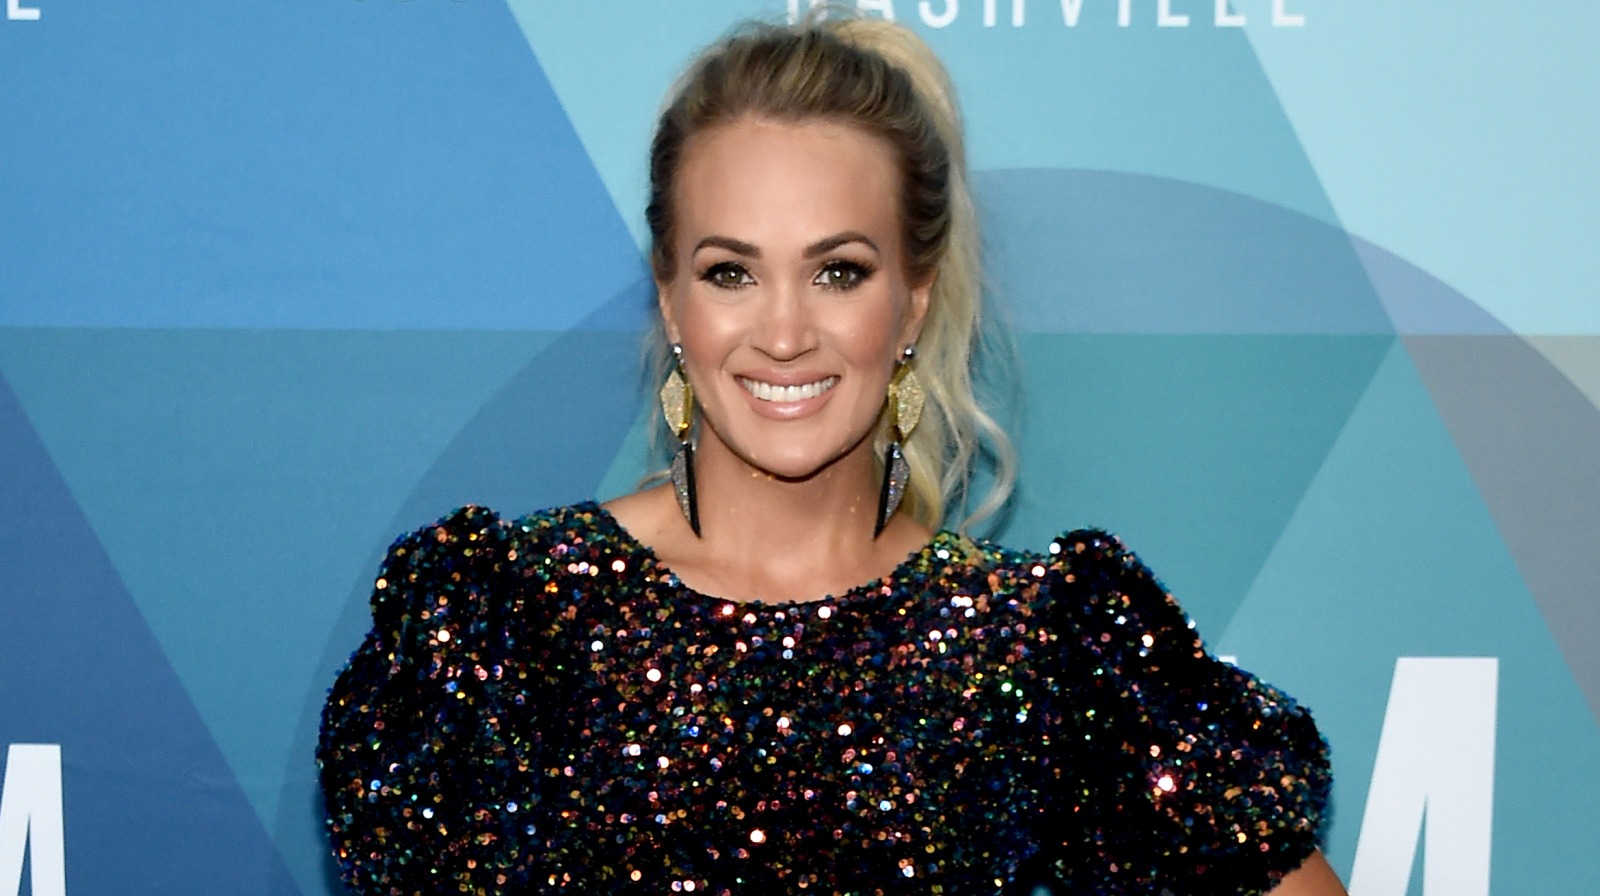 Carrie Underwood is completely different since American Idol